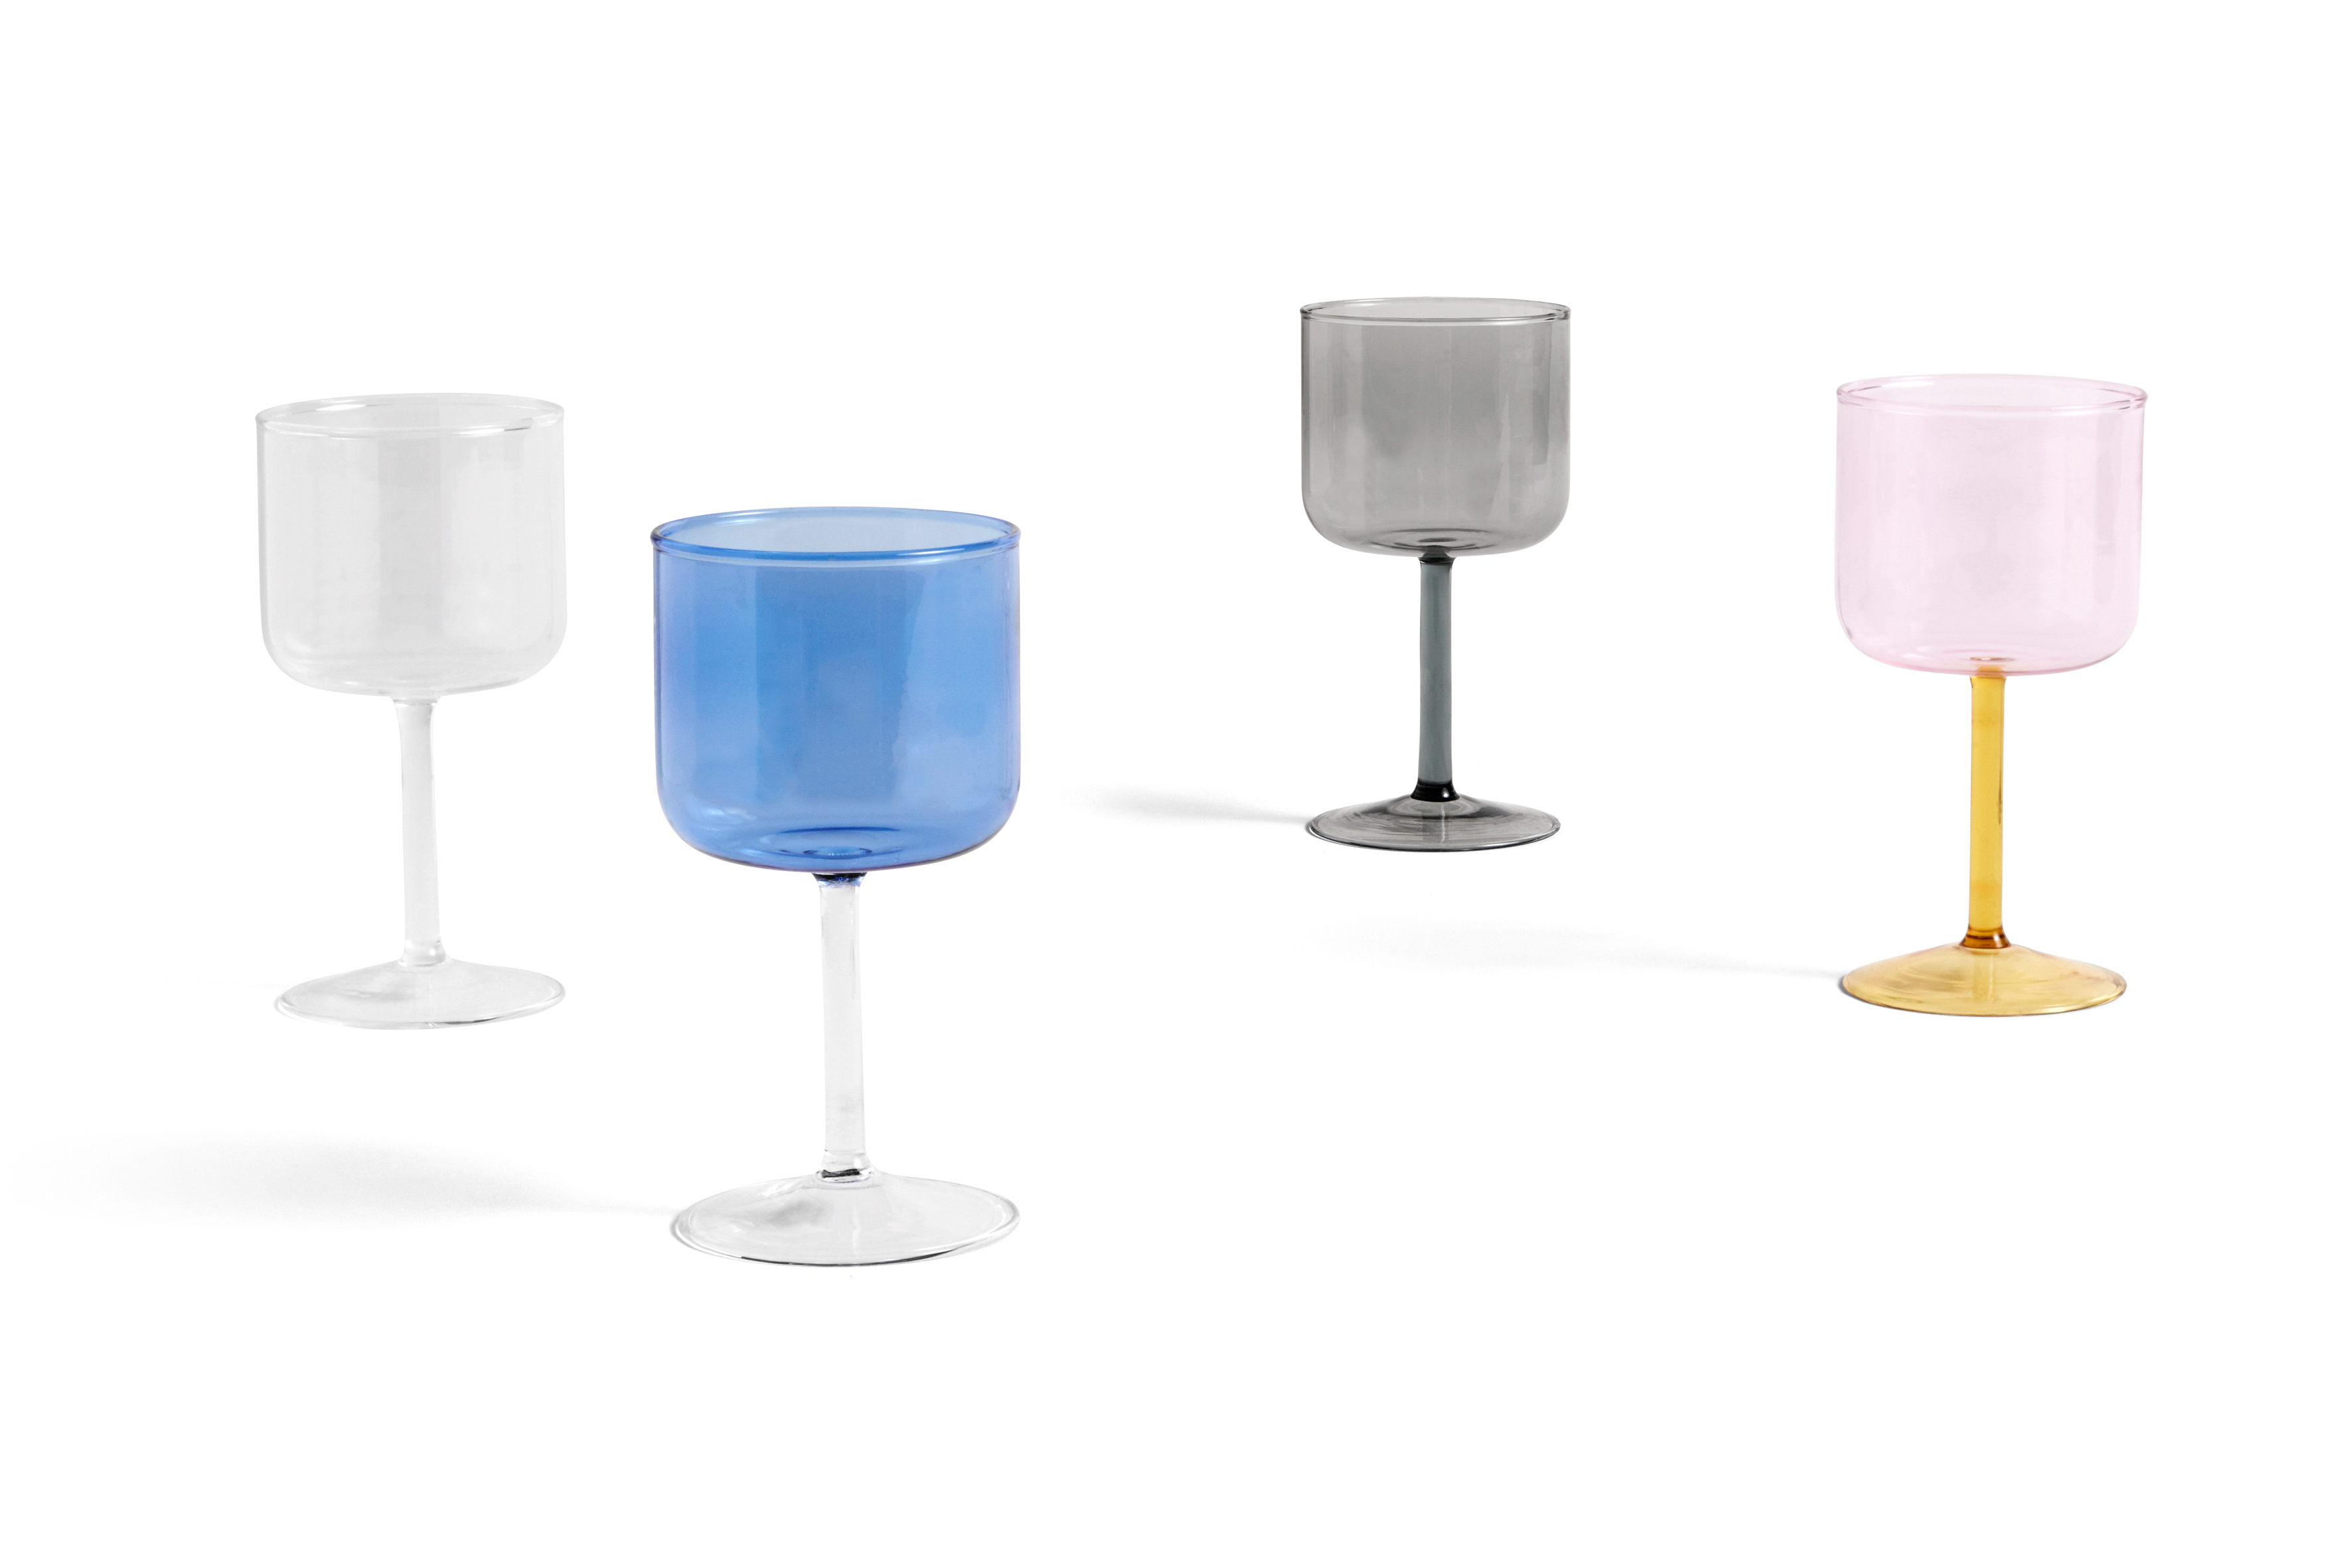 https://www.nordicnest.com/assets/blobs/hay-tint-wine-glass-25-cl-2-pack-pink-yellow/504543-01_2_ProductImageExtra-59e7e617b2.jpg